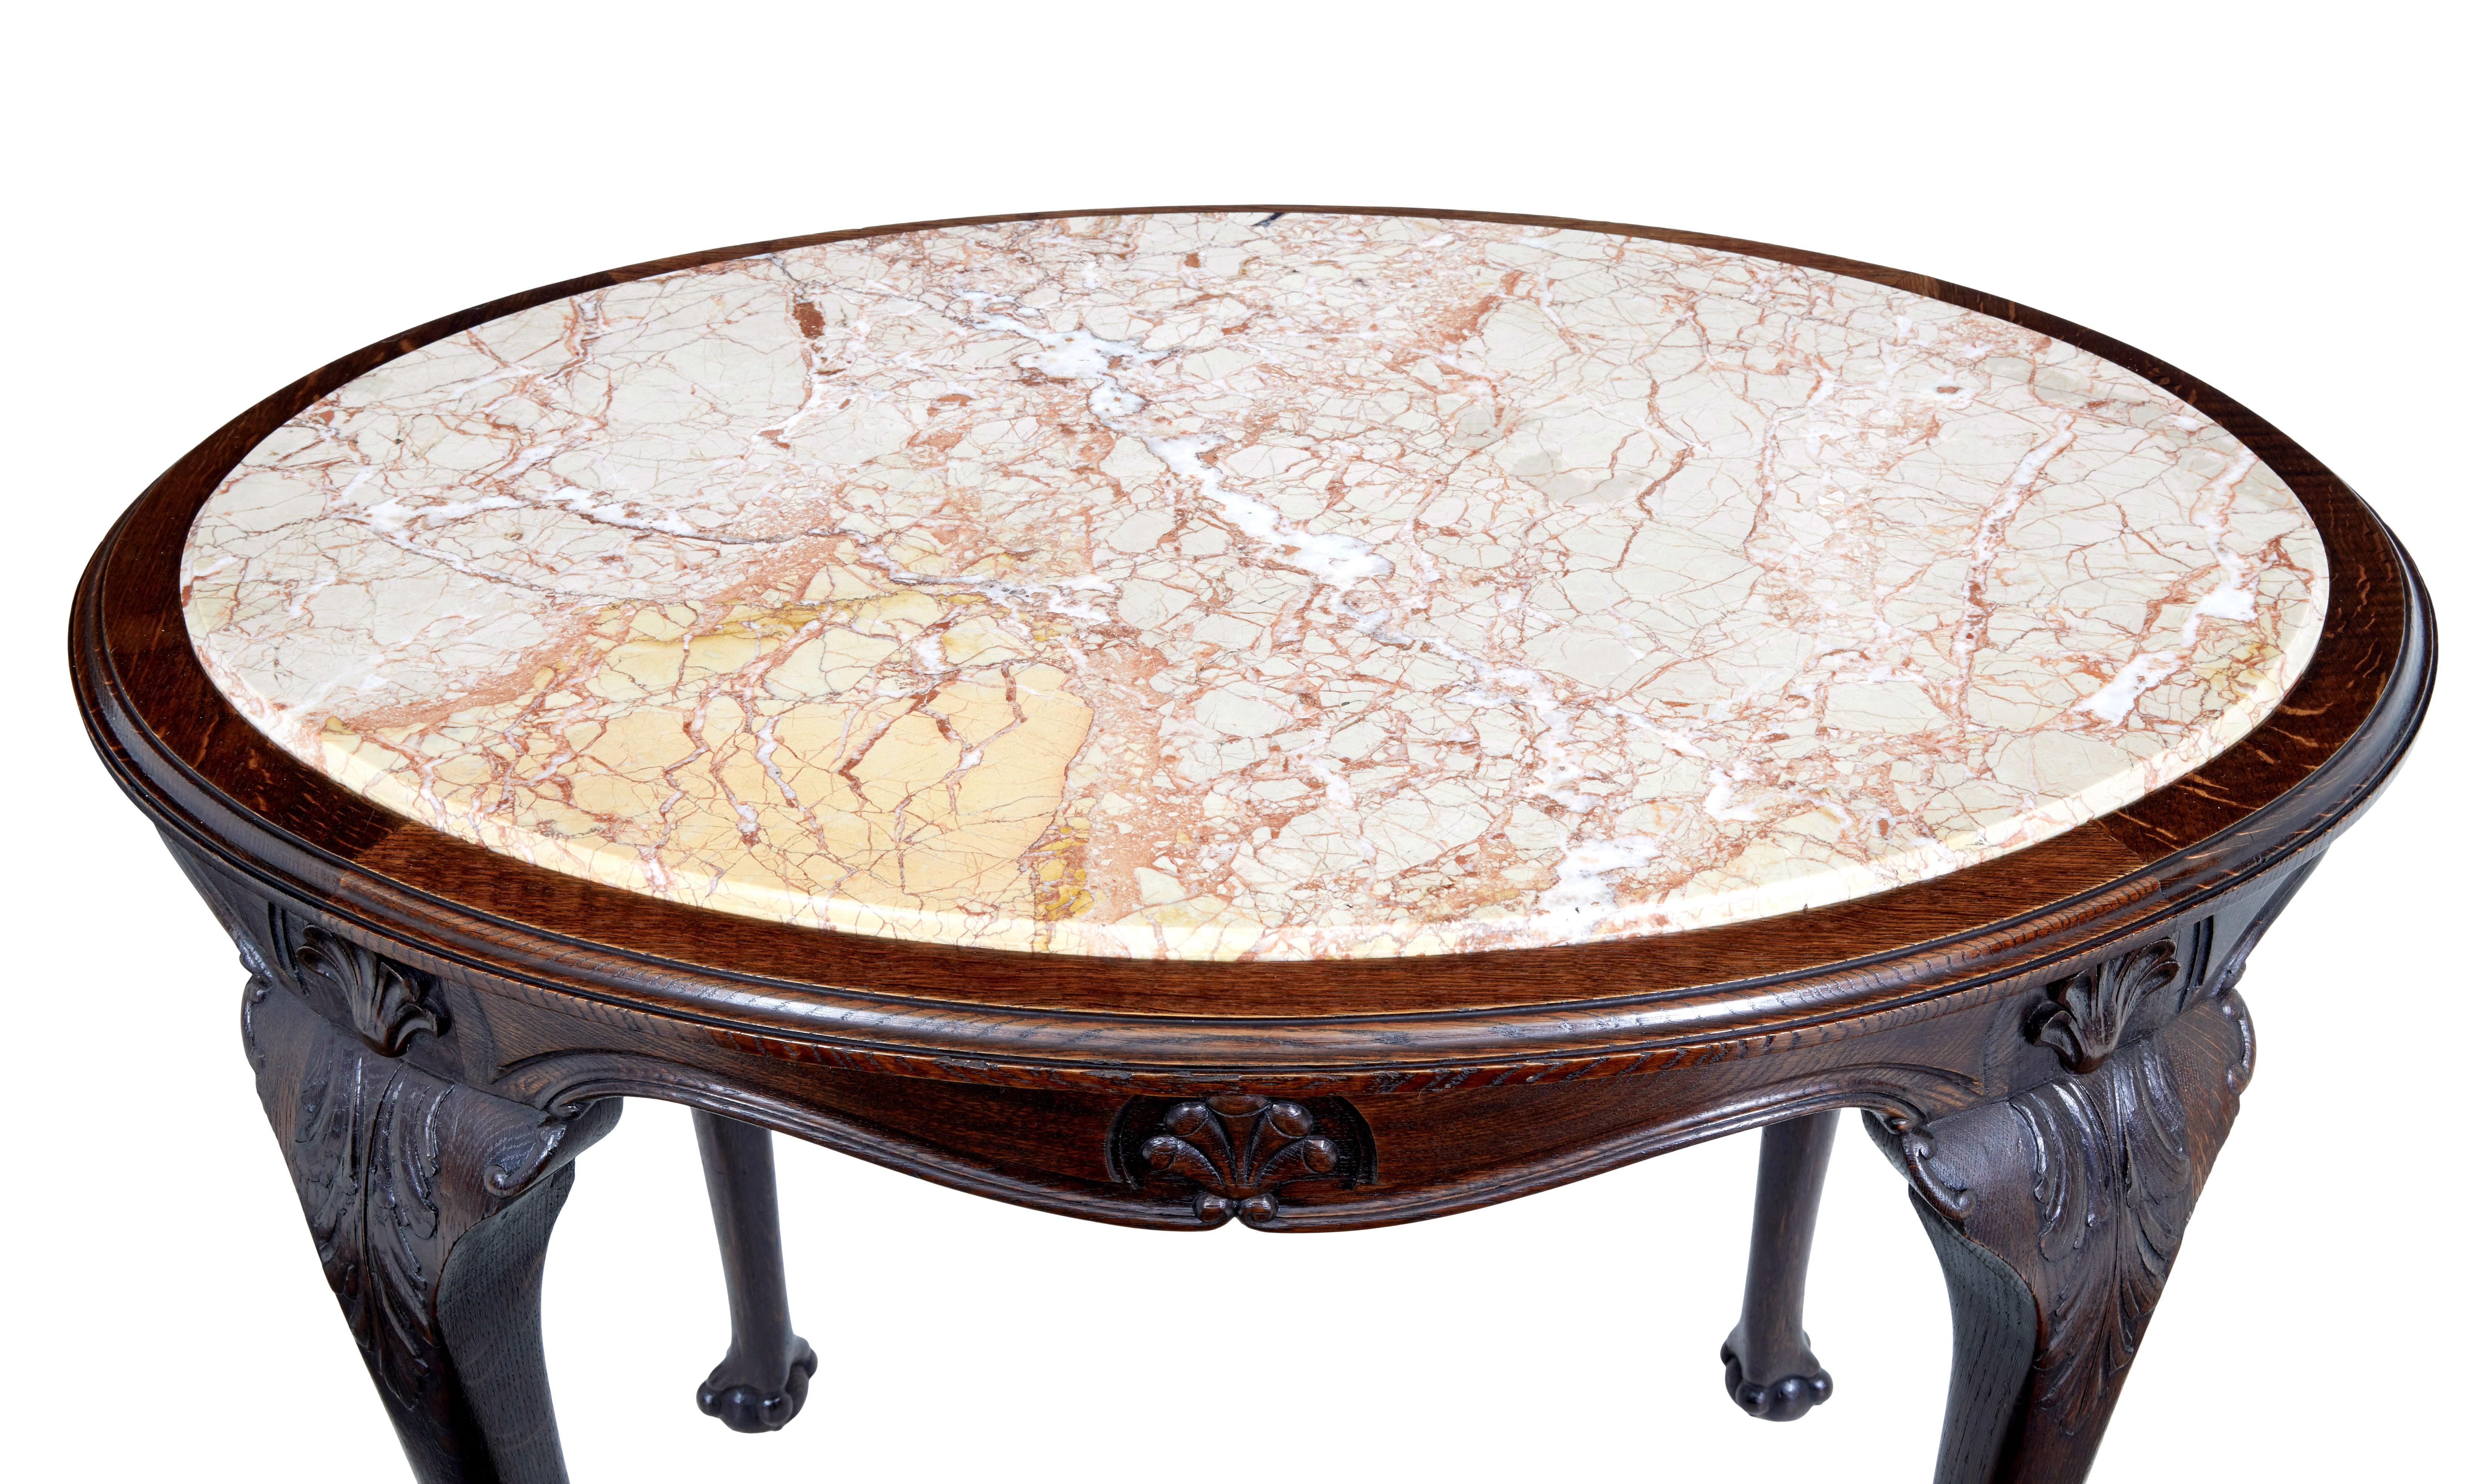 19th century french oak marble top center table circa 1880.

Art nouveau oak center table, stunning inset veined marble top with carved shells to the apron. Standing on 4 cabriole legs with further shells and carved leaves. Terminating on a ball and